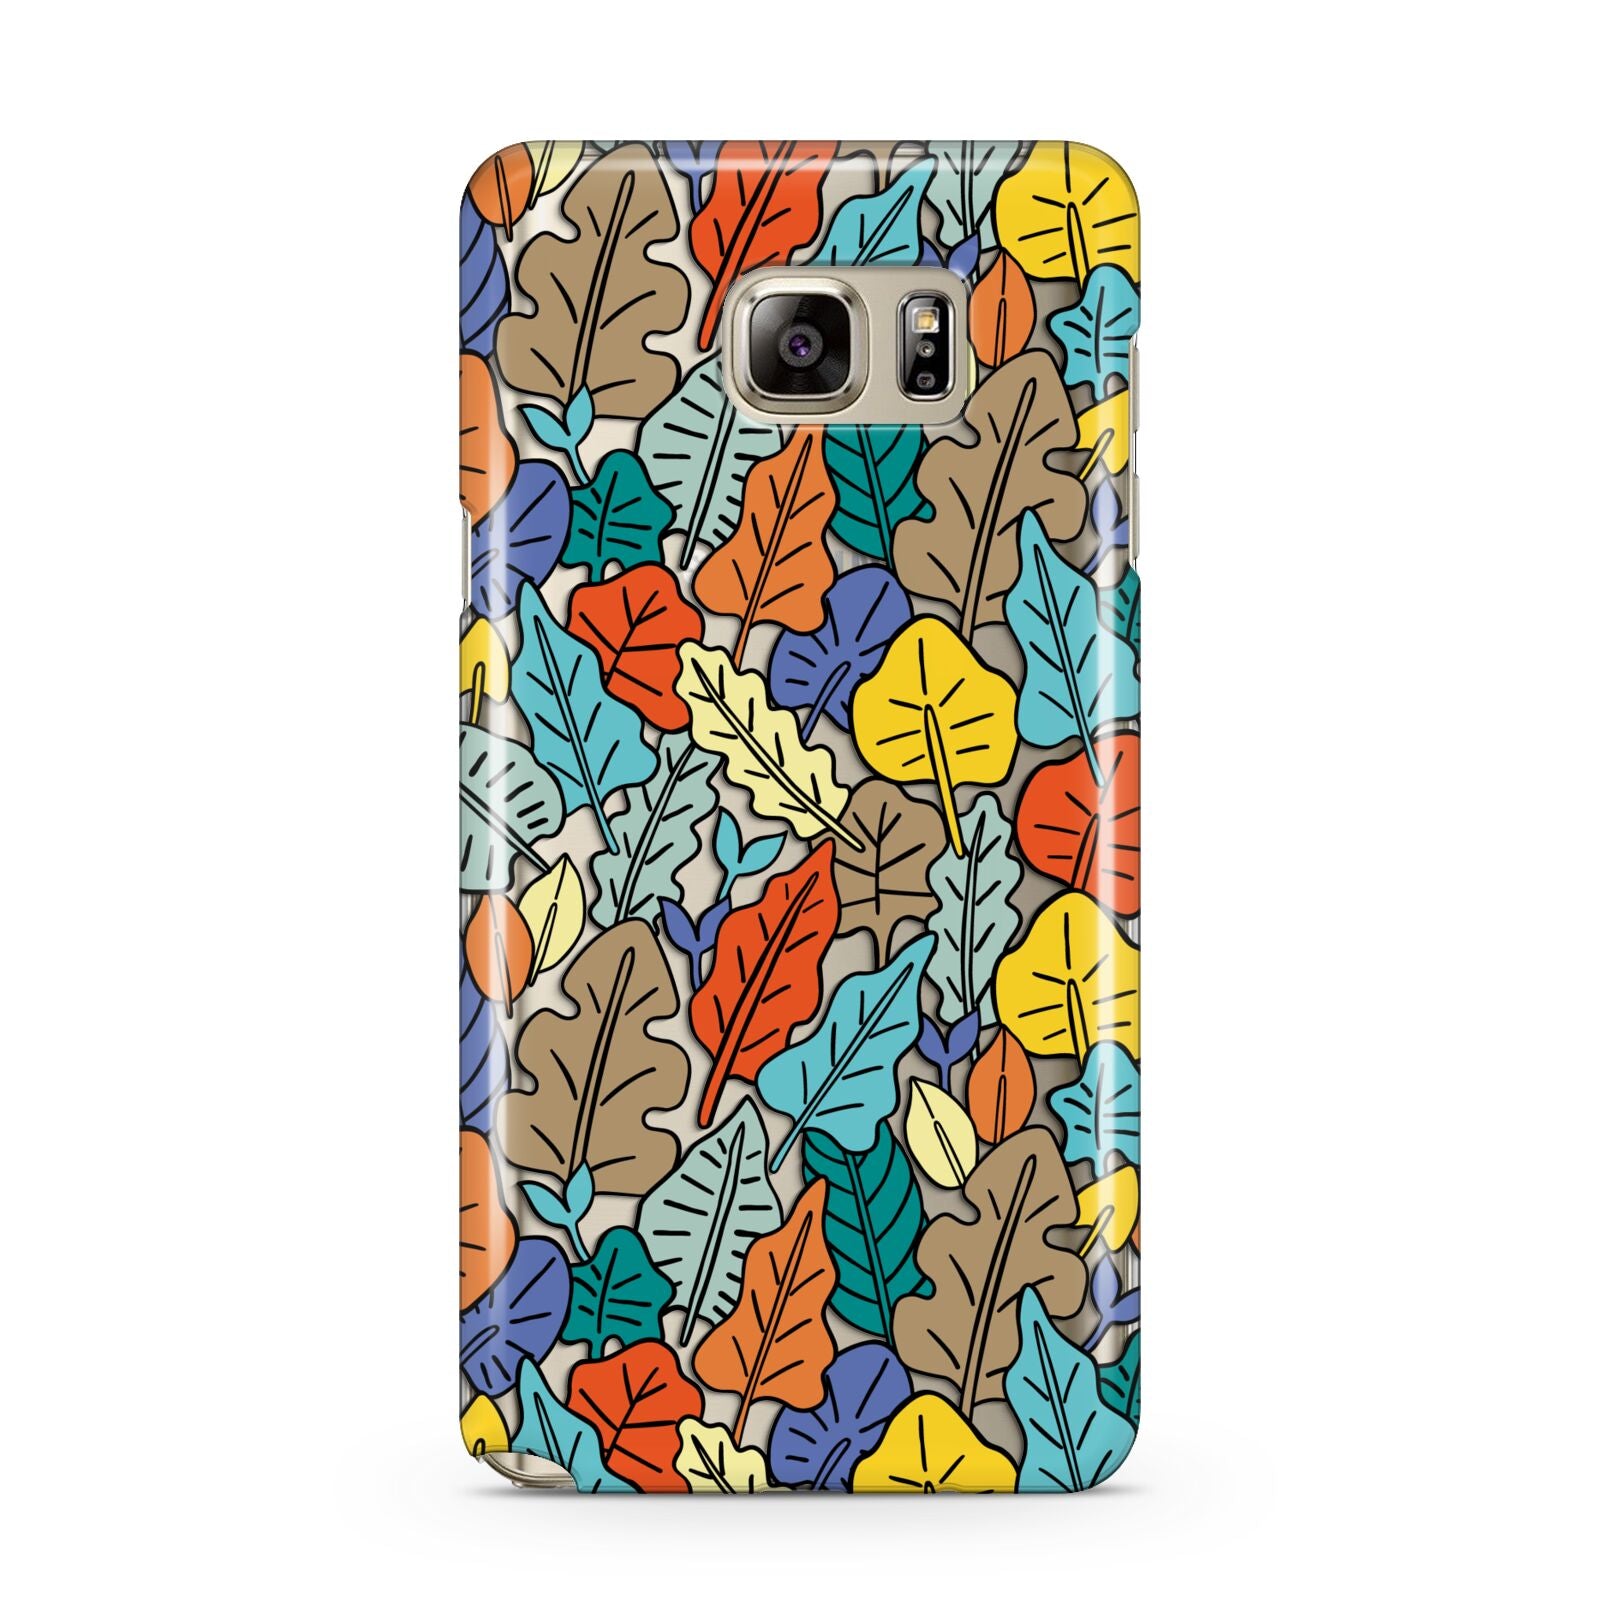 Autumn Leaves Samsung Galaxy Note 5 Case